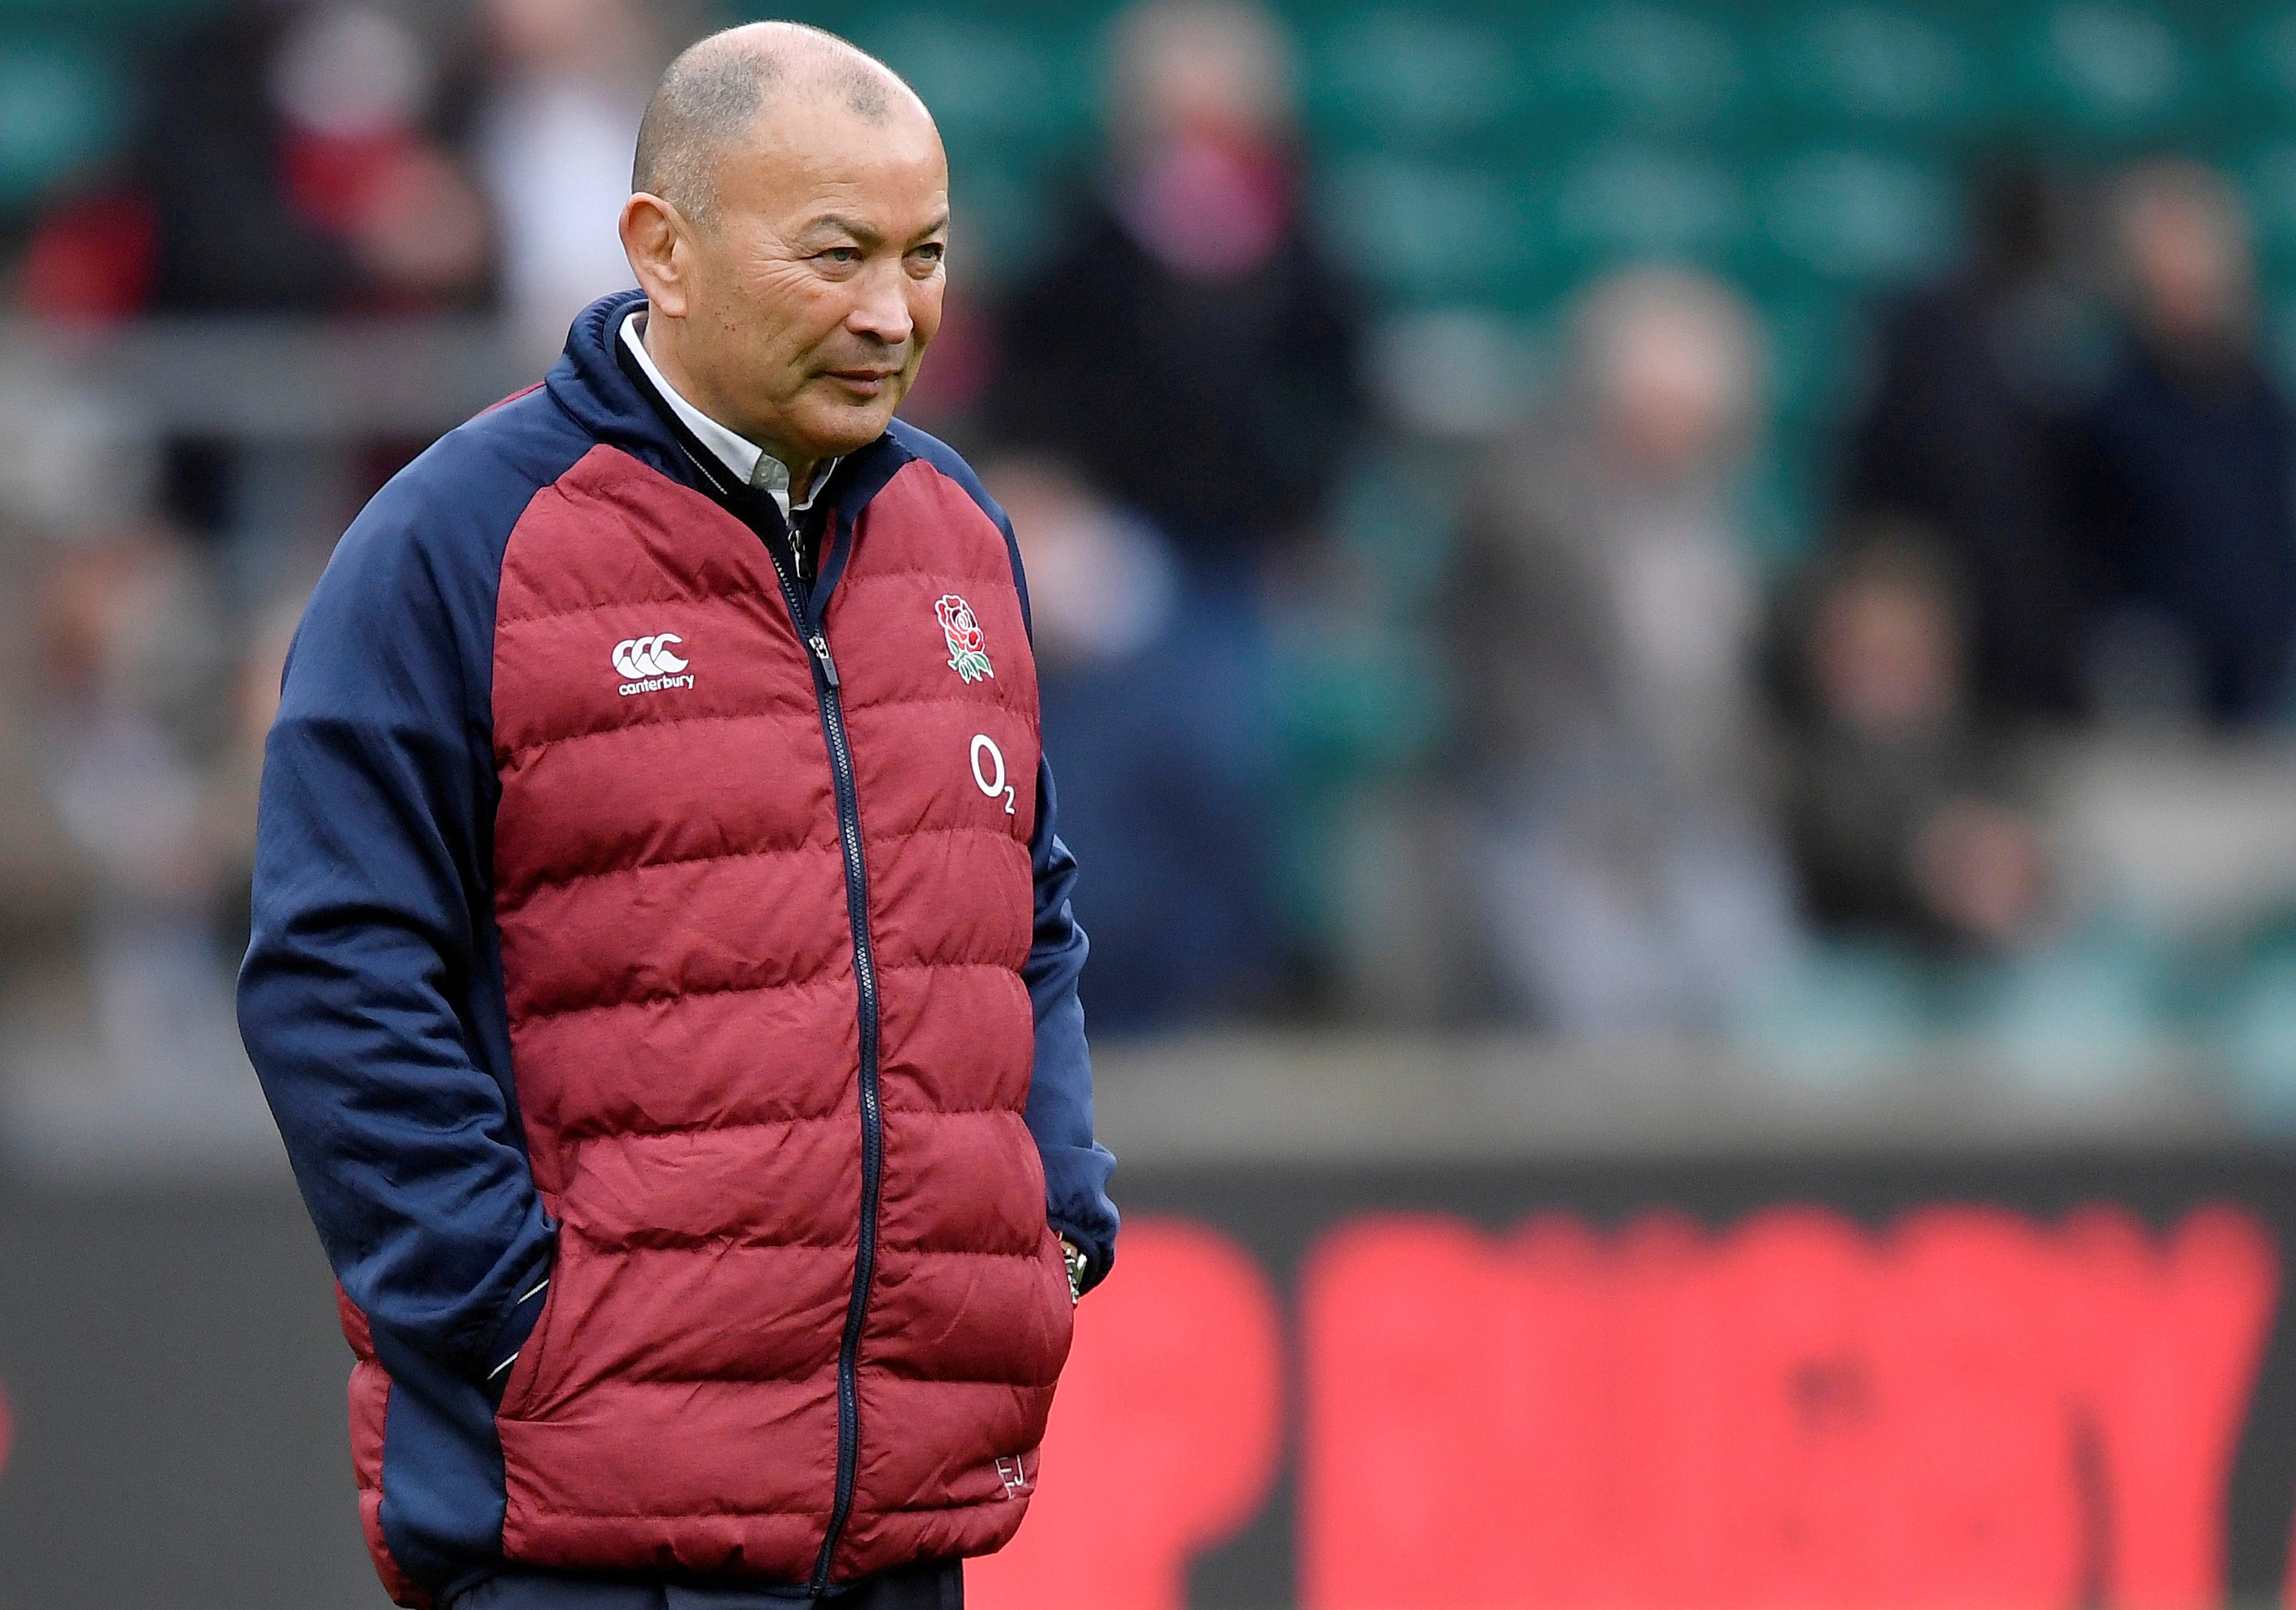 Eddie Jones has named 12 uncapped players in his England training squad